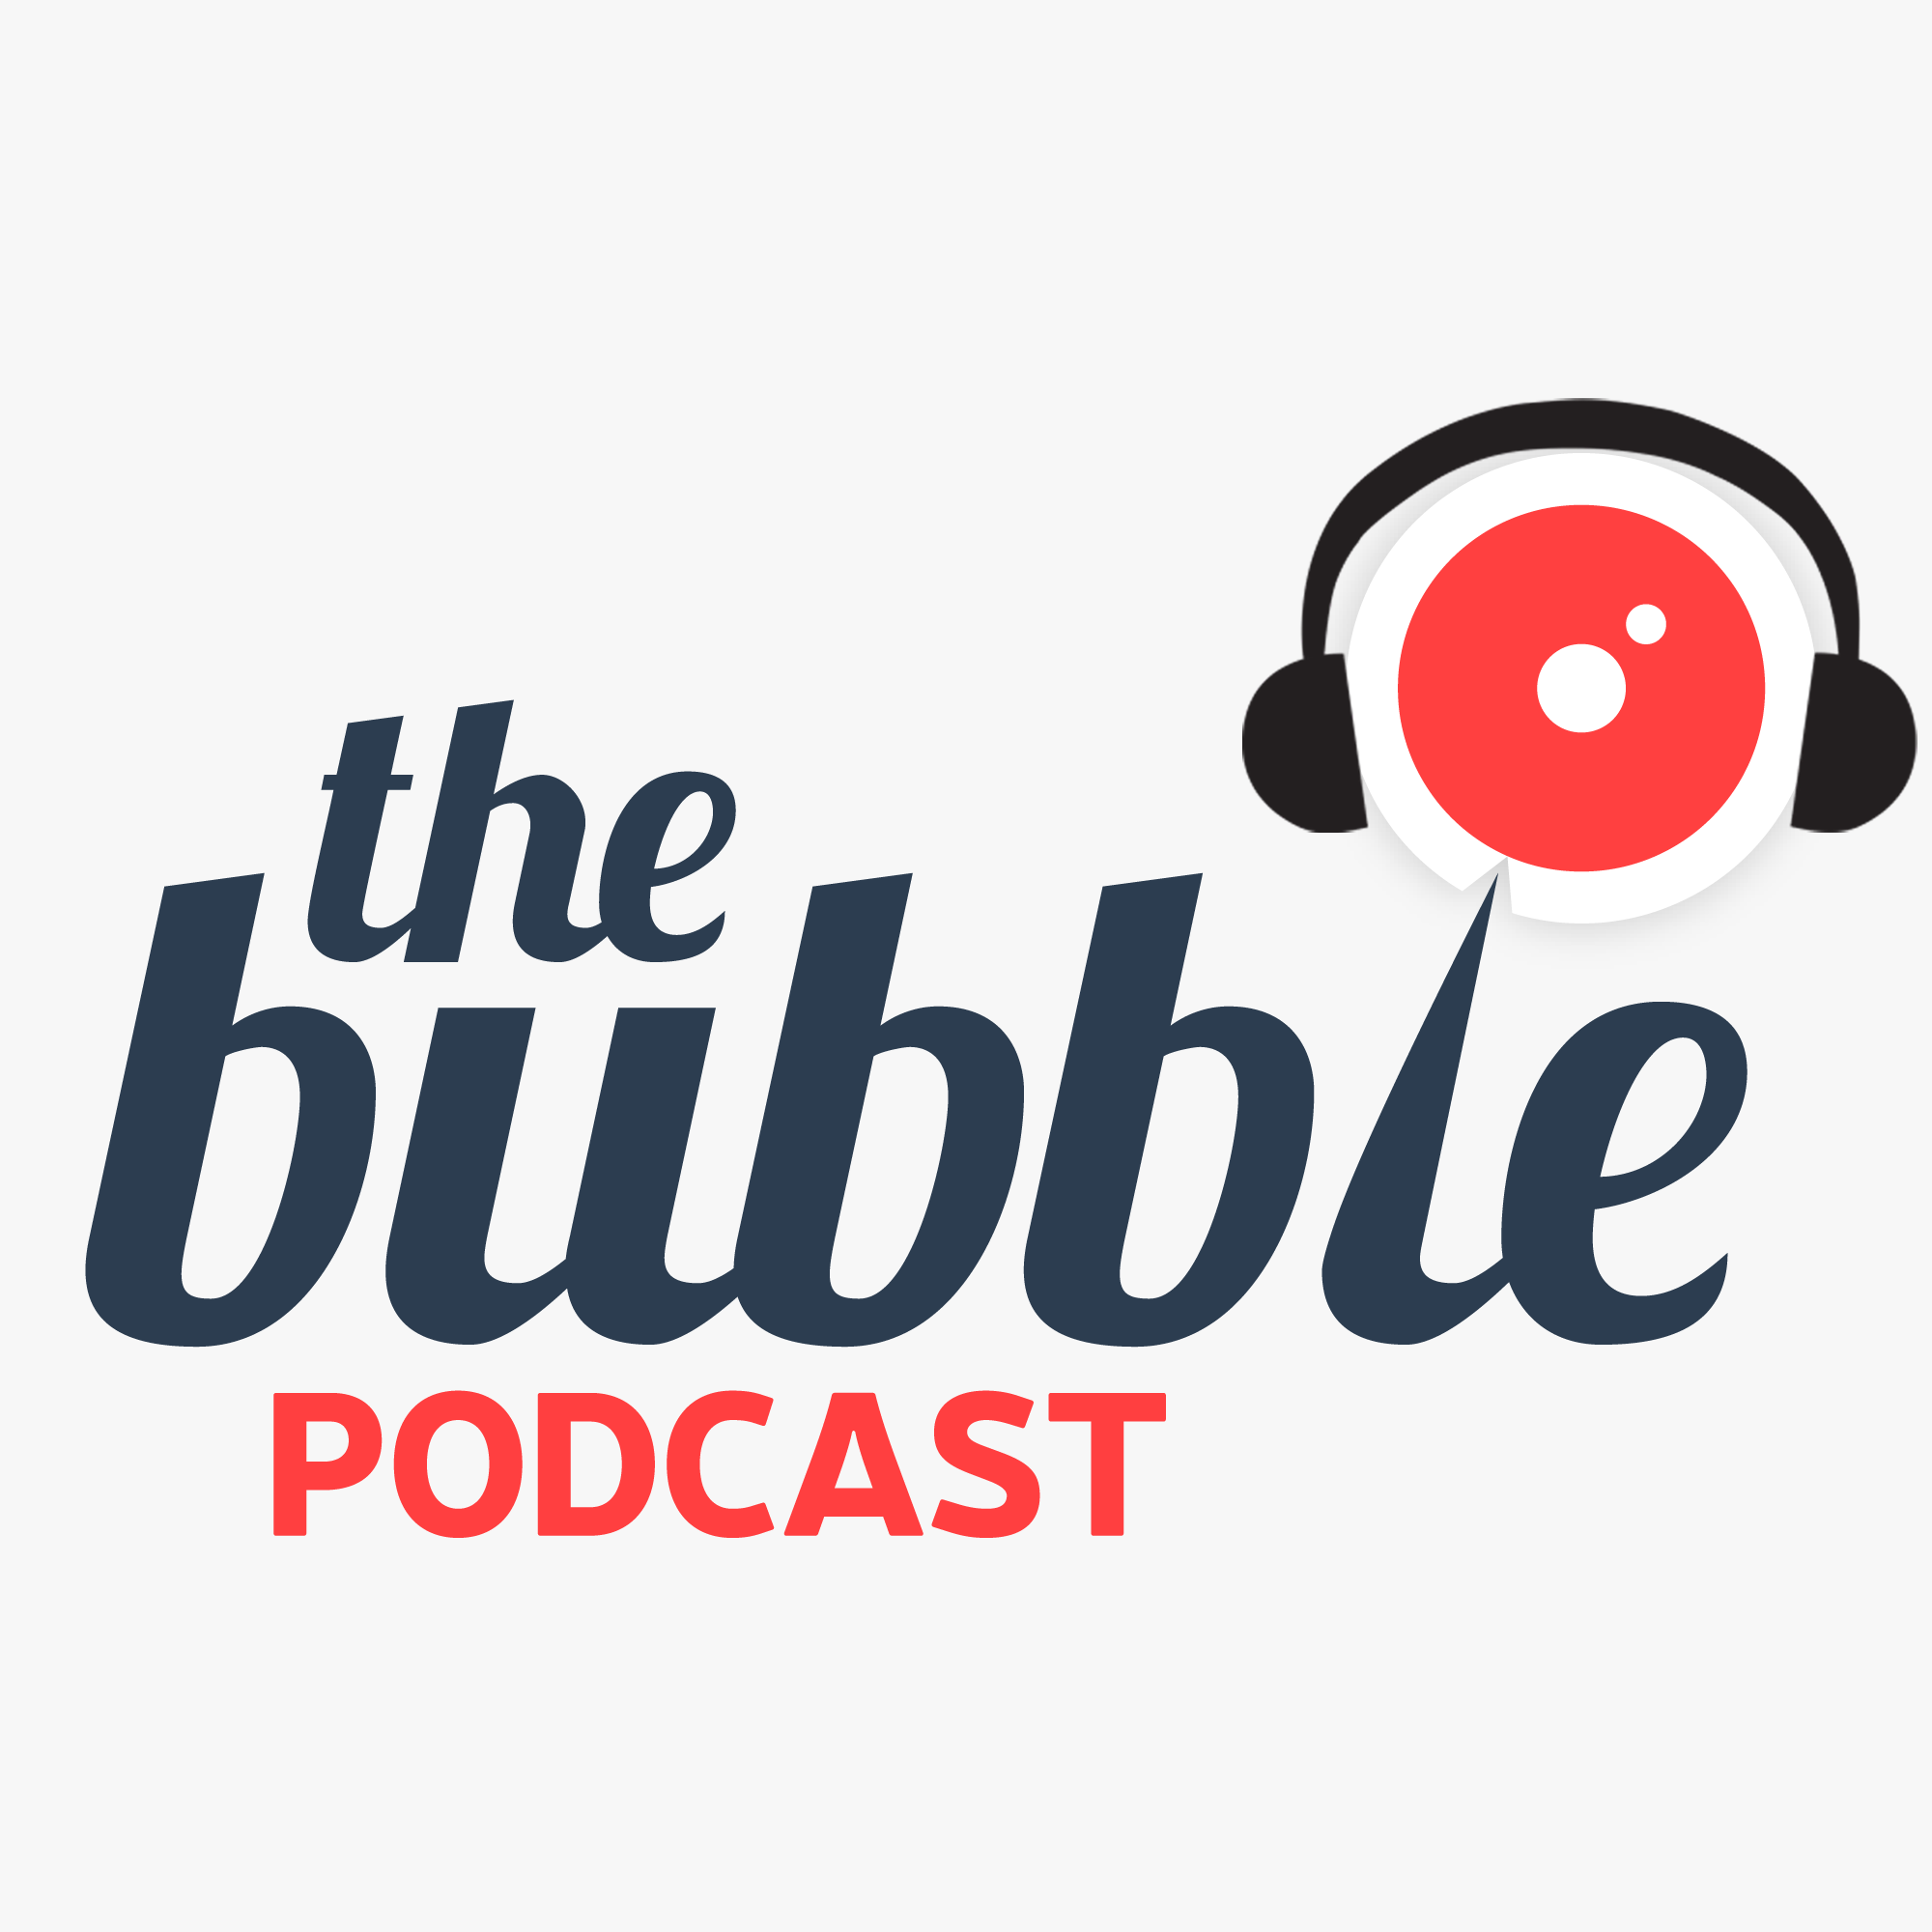 #Podcast The Bubble 10.07: Macri’s part in G20, celebrations/mess-ups 9/7, dollar price, and more!